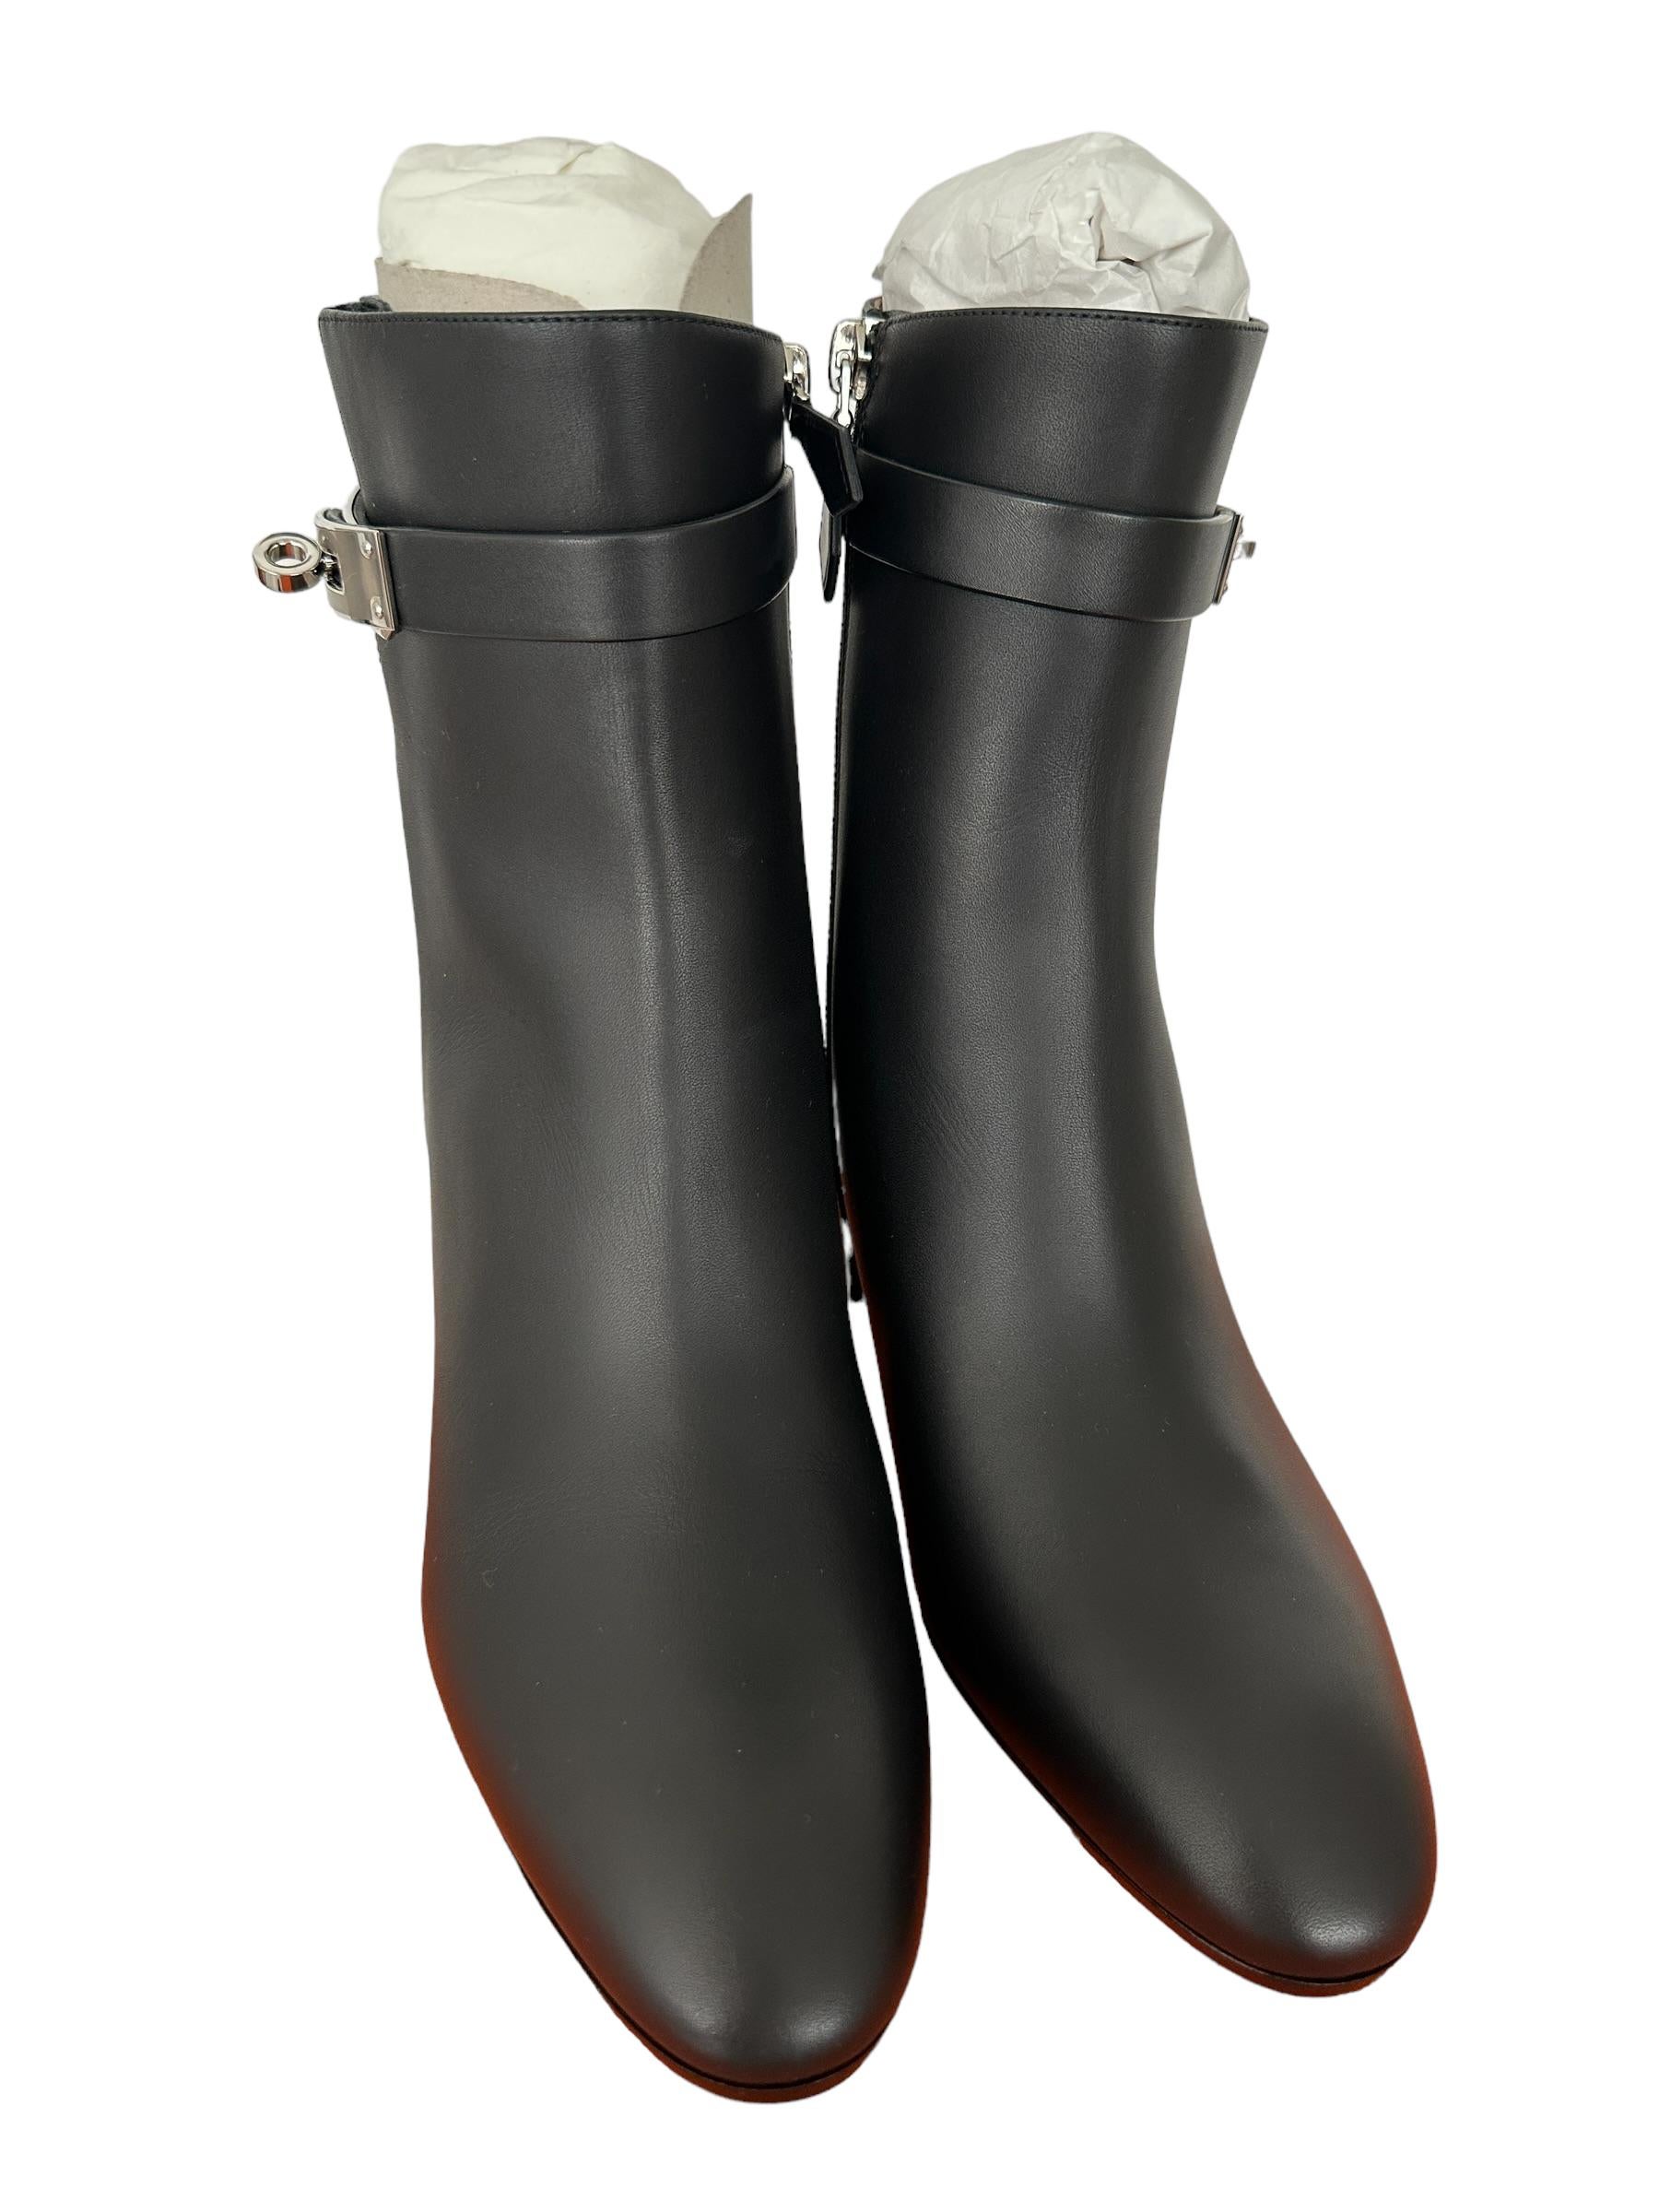 Hermes Black Leather Boot
Saint Germain Ankle Boot
Newest style
So comfortable too!
Size 40
Retail is $2000
The Hermès Saint Germaine boot is a luxury women's ankle boot from the Hermès brand. The boot is crafted from high-quality leather and